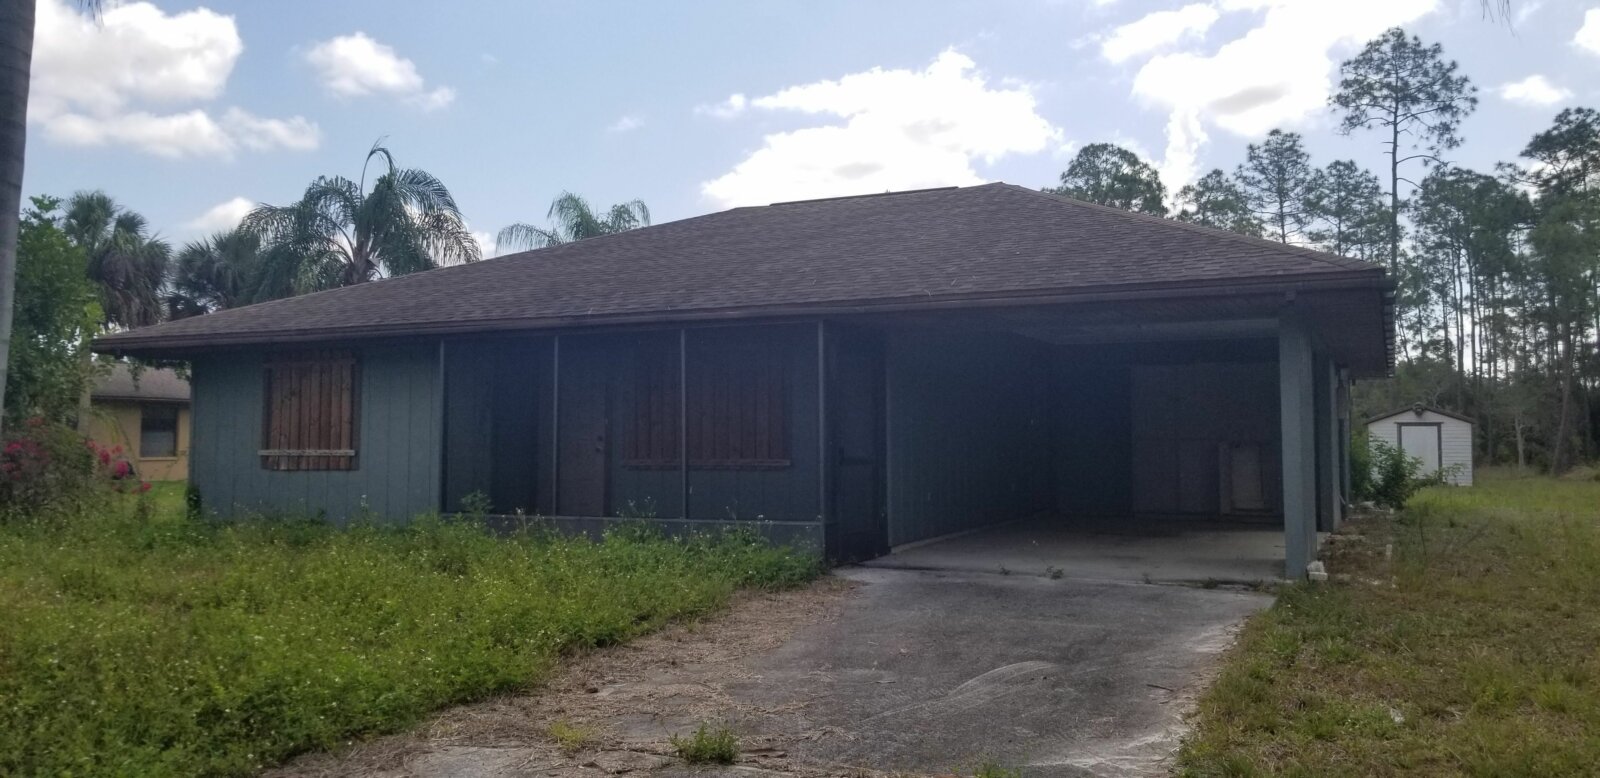 Exterior Photo of new property listing in lehigh acres florida by core real estate solutions